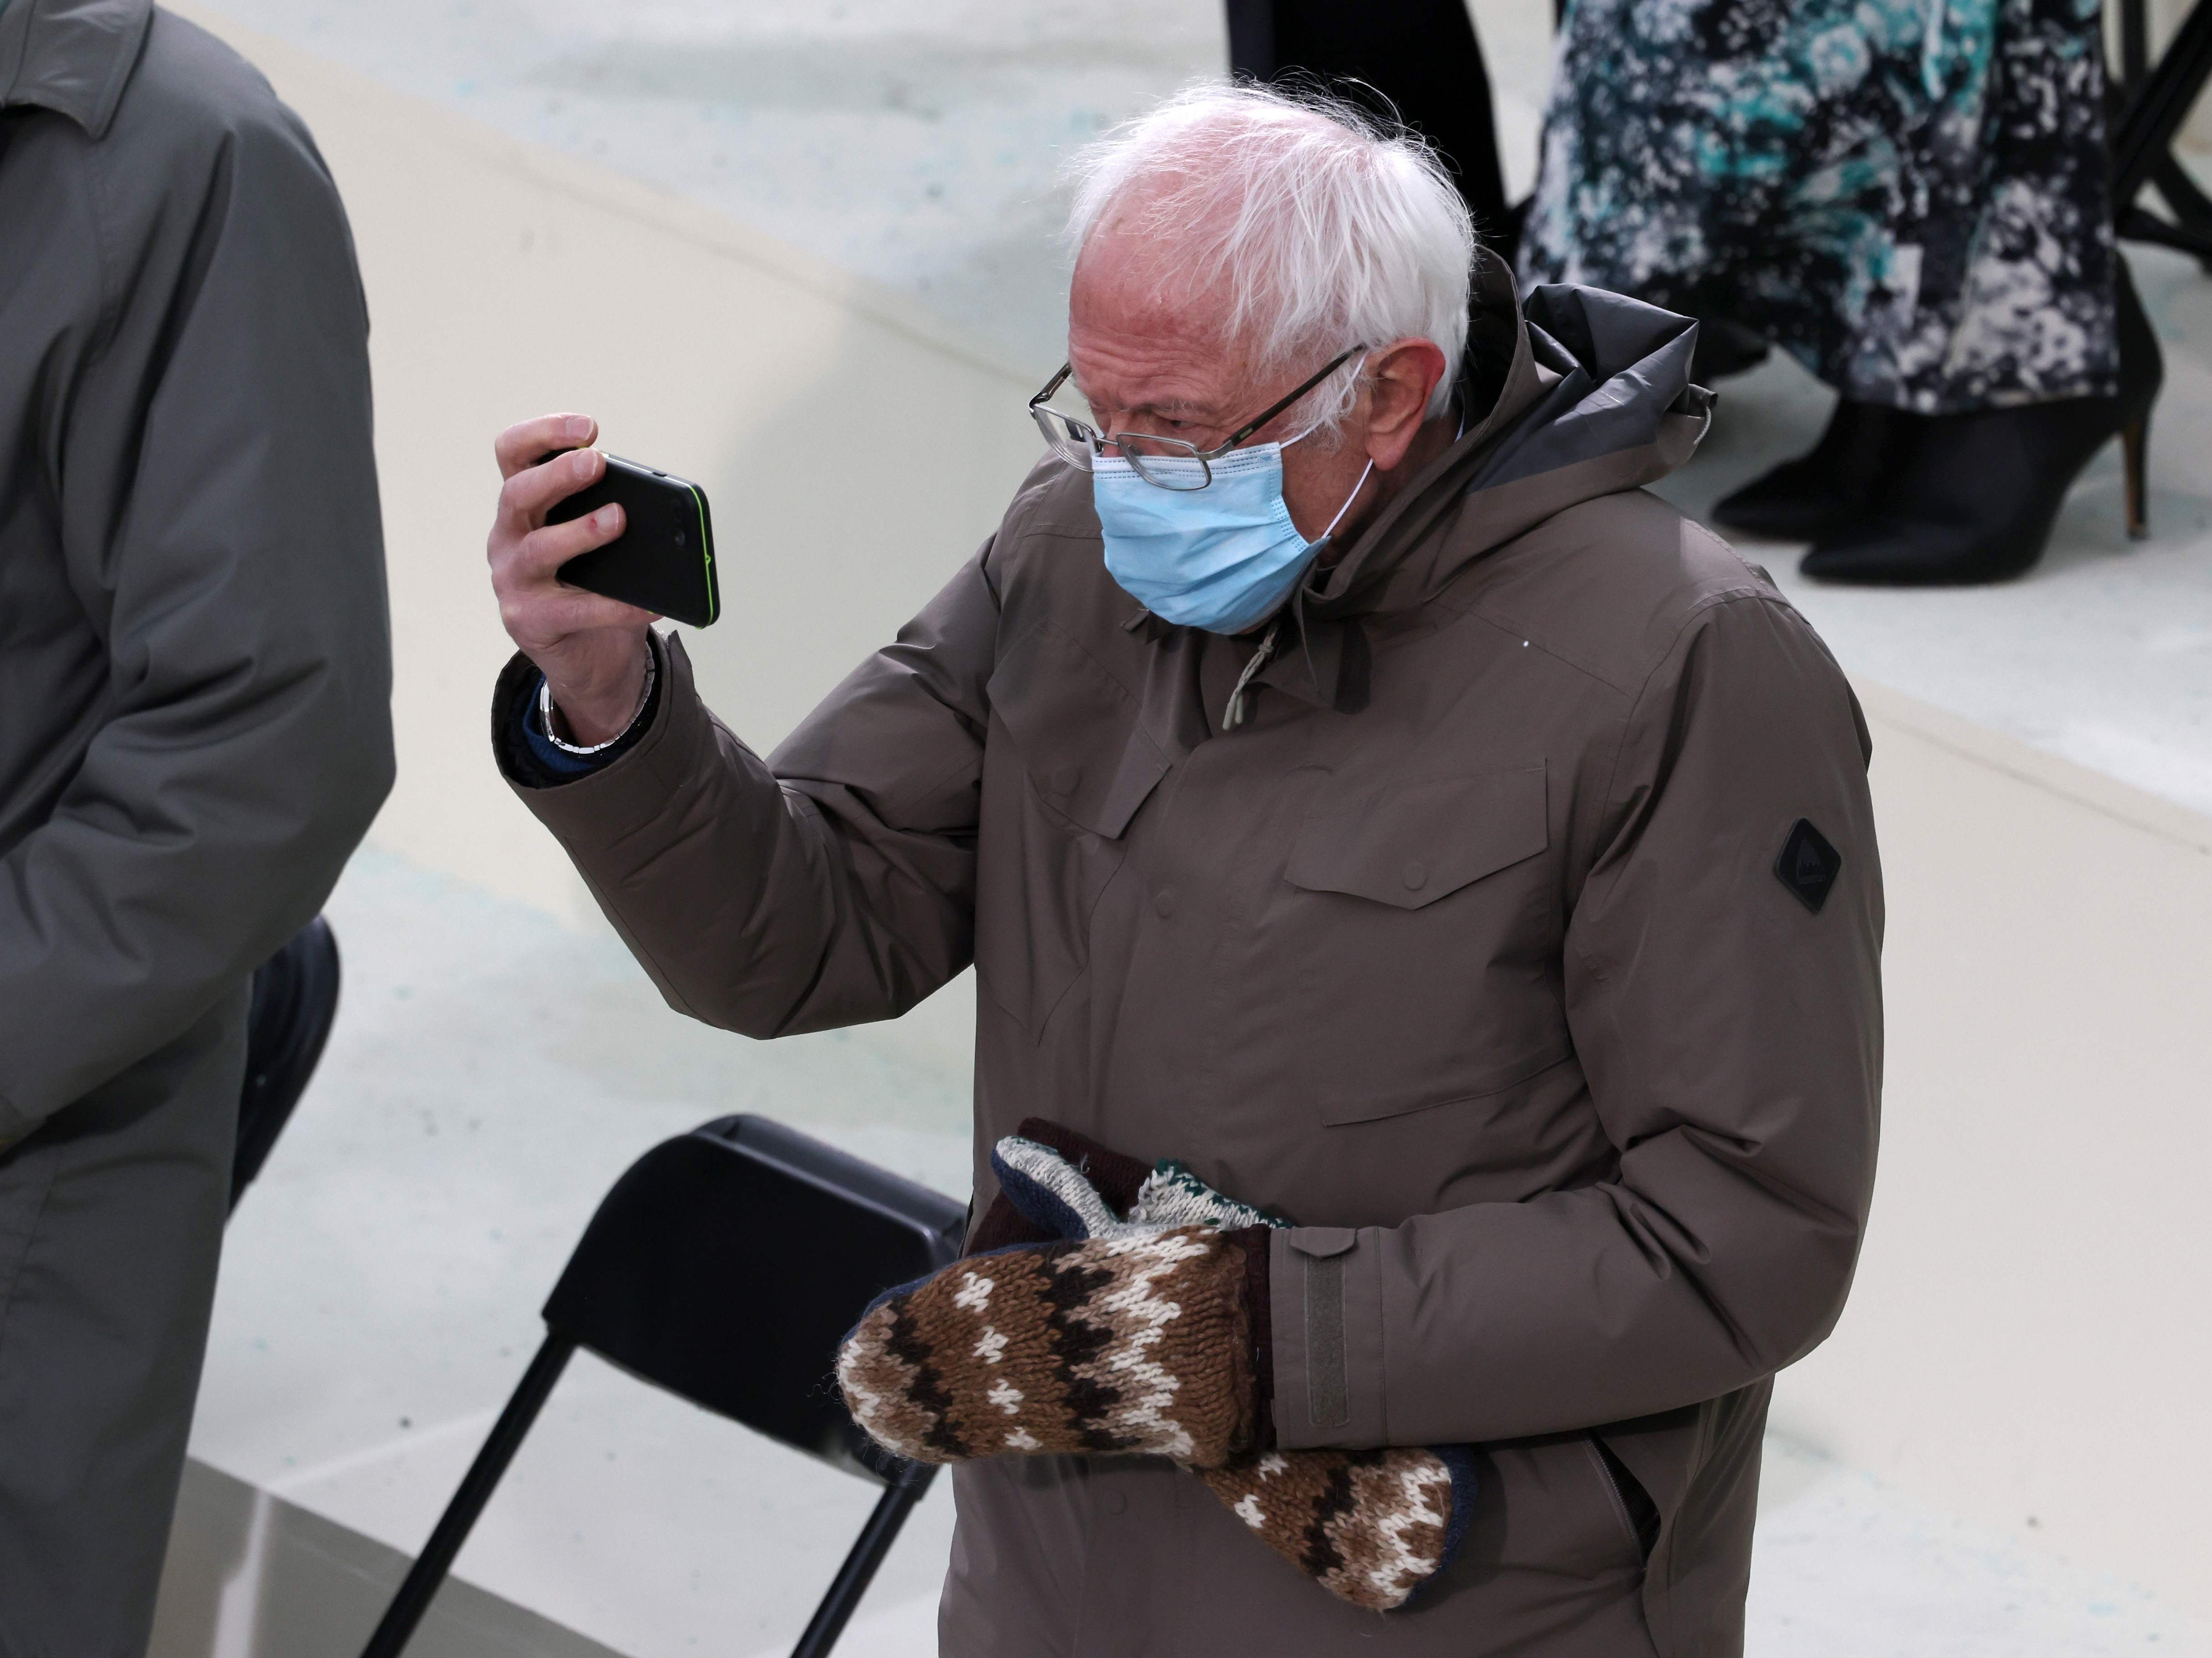 Sen. Bernie Sanders (I-VT) arrives at the inauguration of US President-elect Joe Biden on the West Front of the US Capitol on January 20, 2021 in Washington, DC.